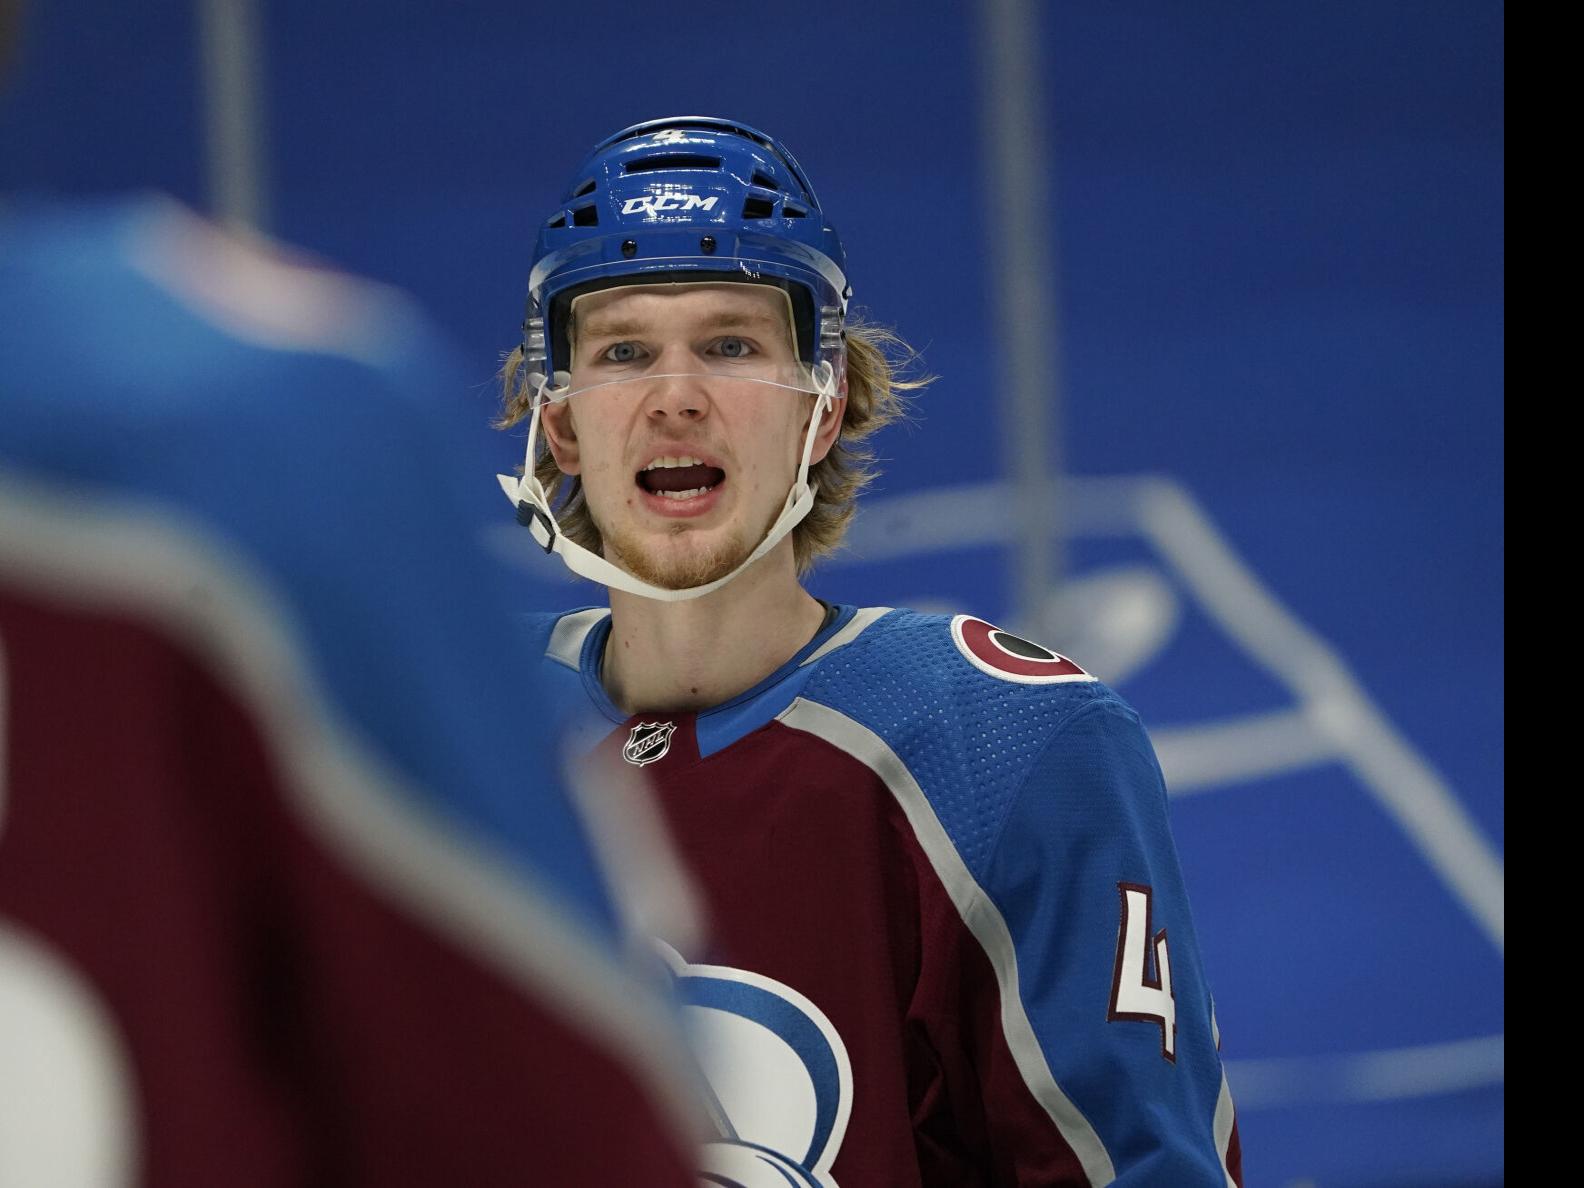 Bowen Byram expected to play big role for Colorado Avalanche - My